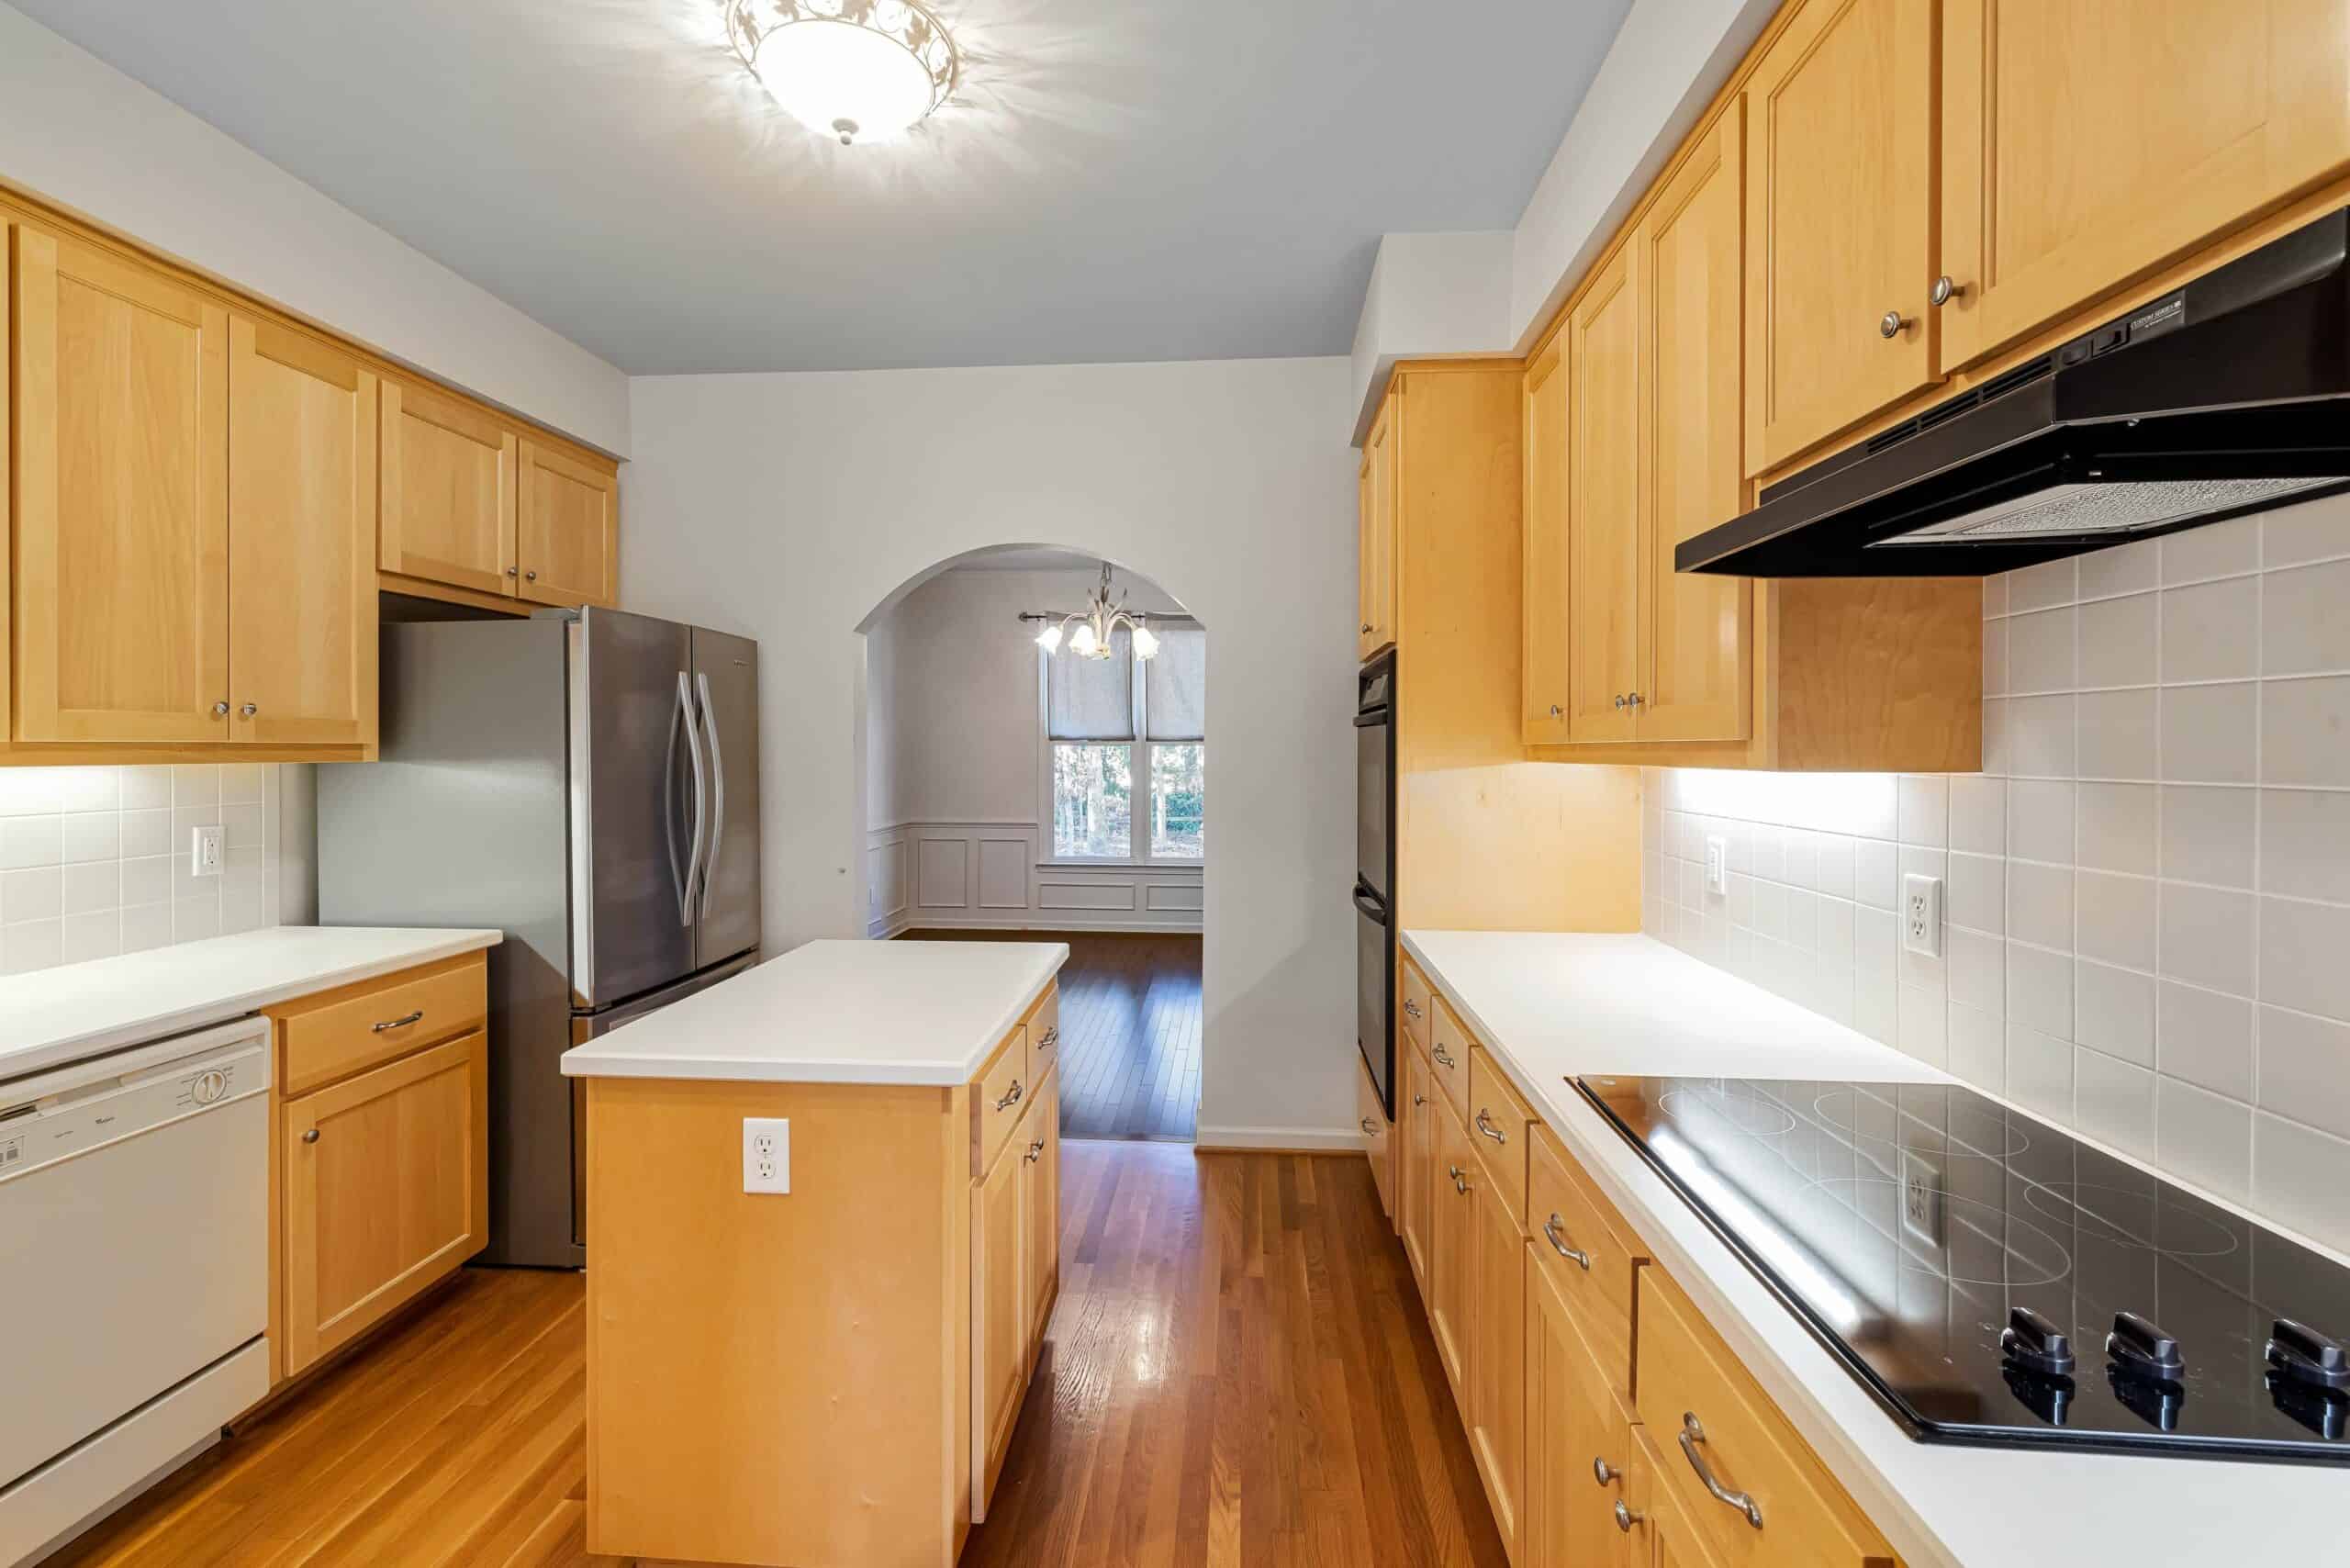 empty kitchen space with clean white counters, lacquered wood cabinets, modern gas stove, and 2-door refrigrator